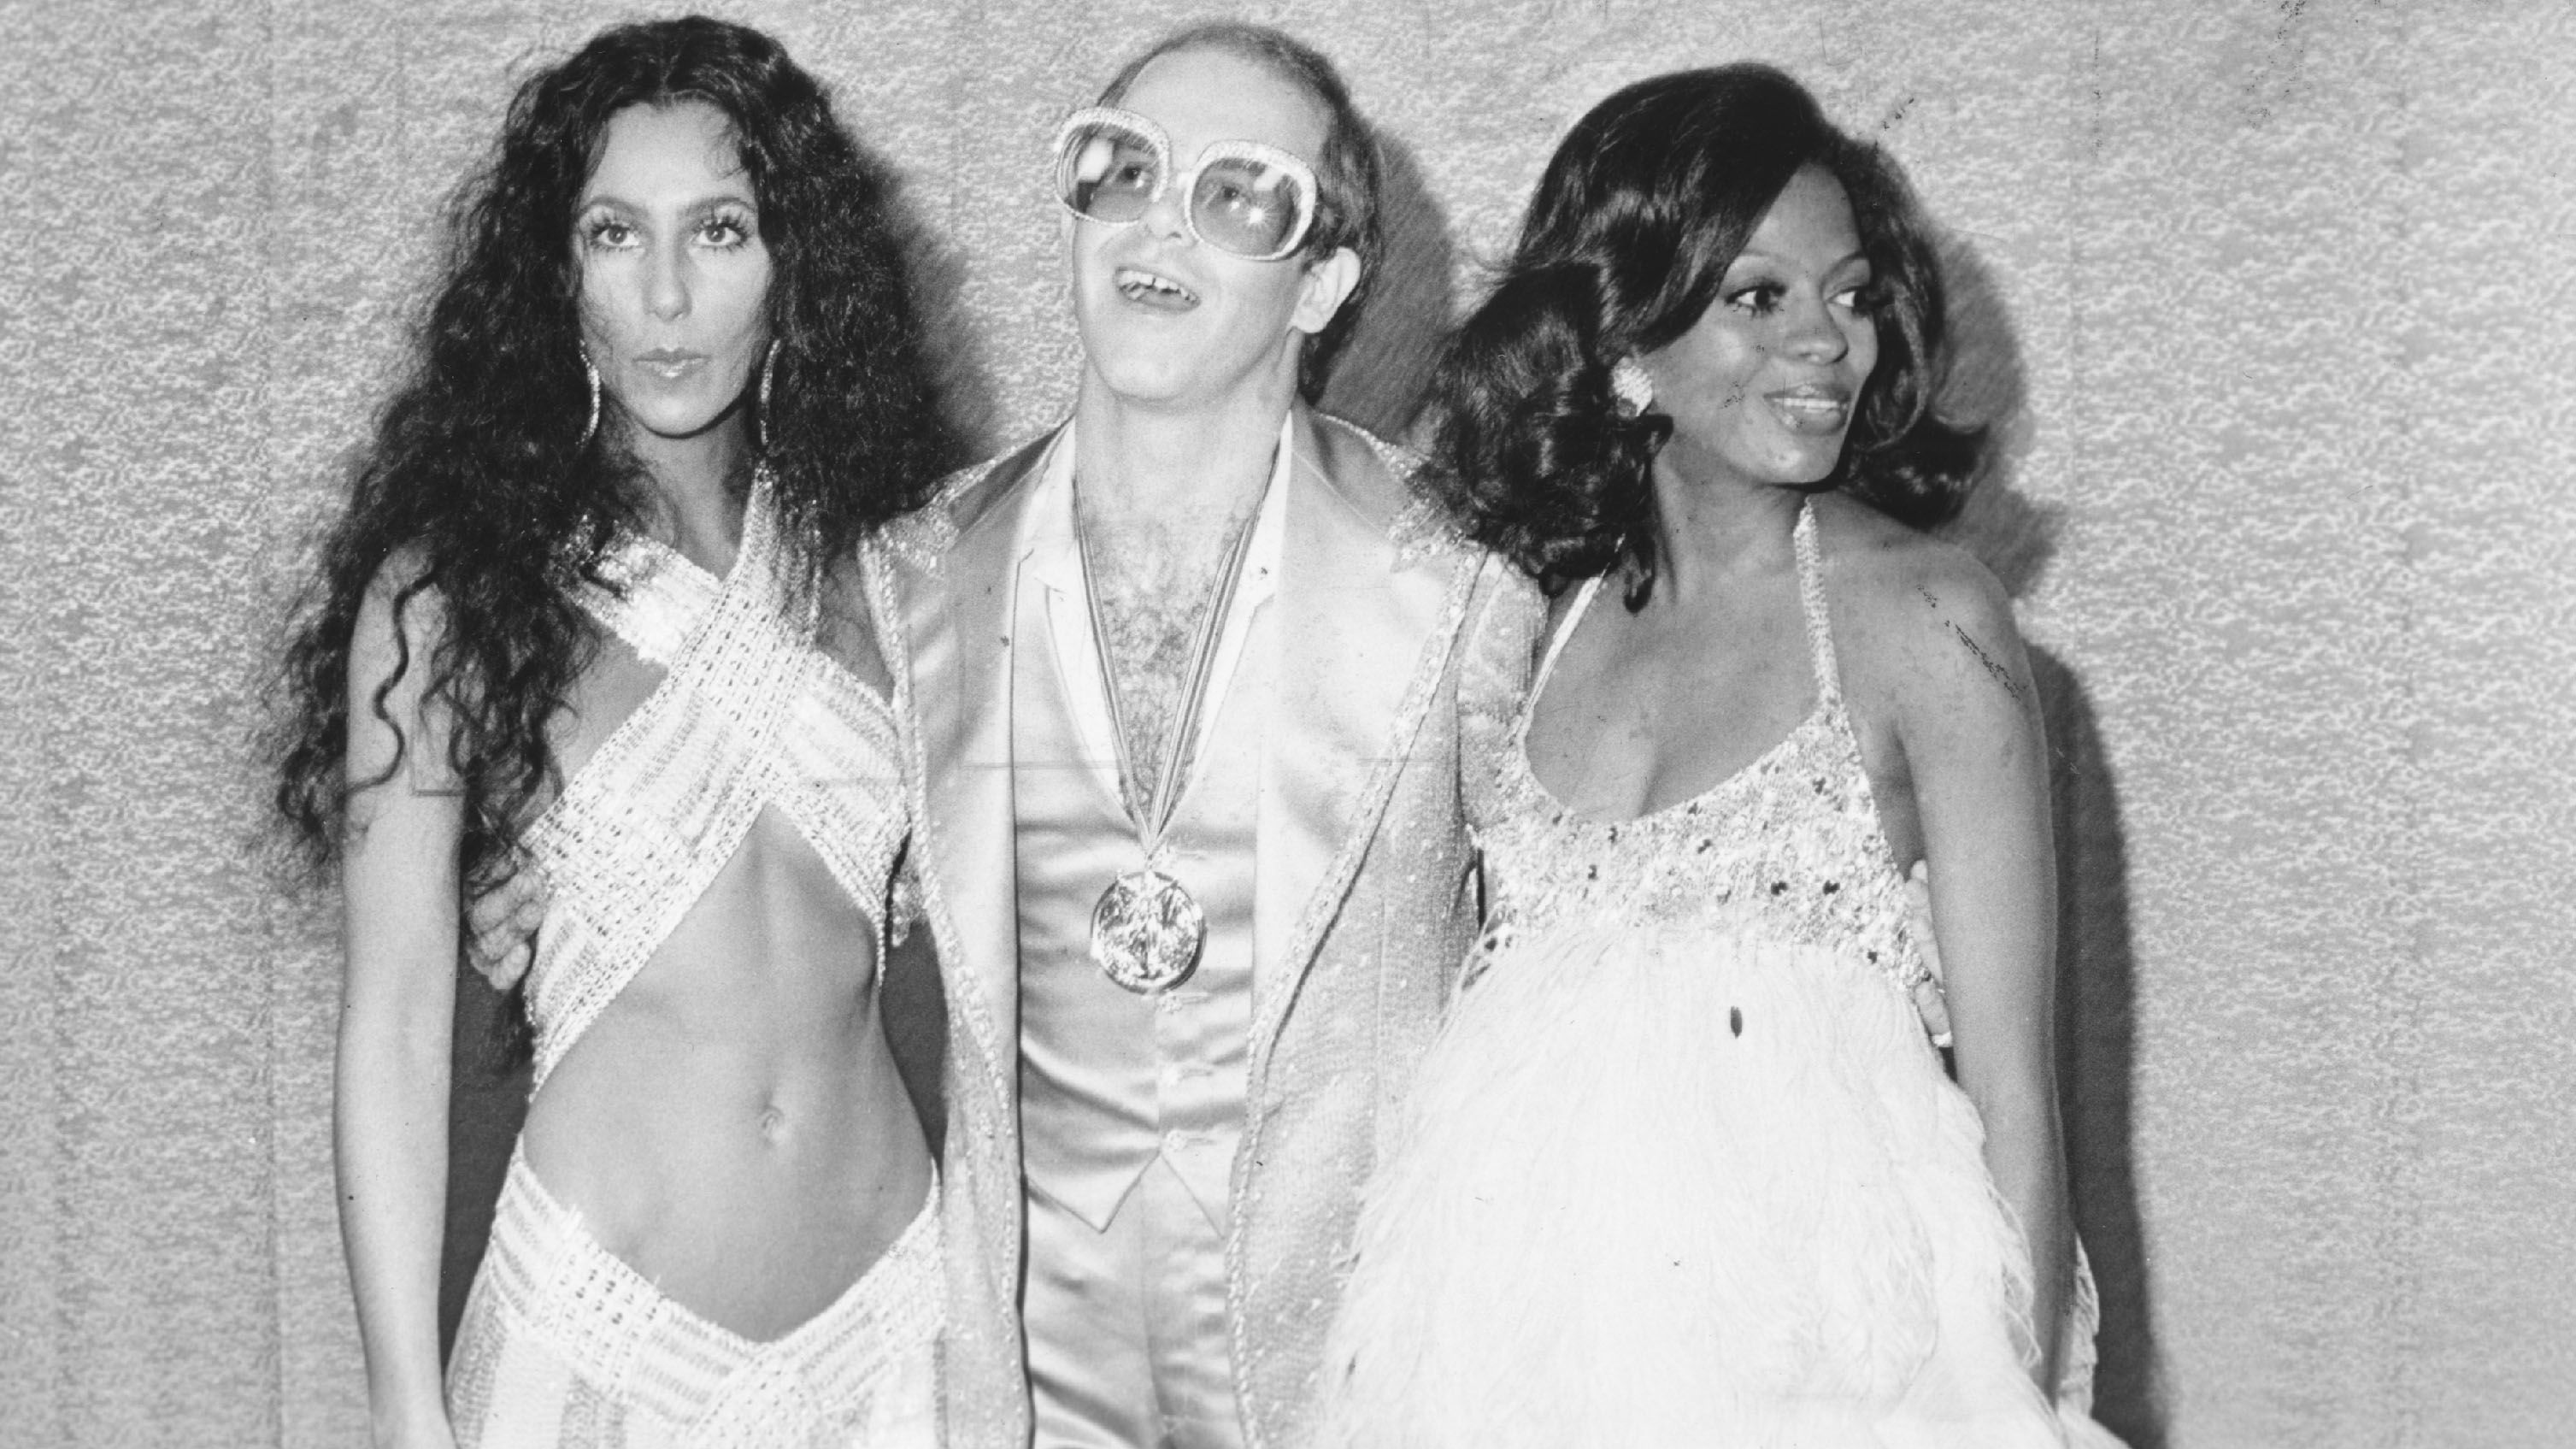 John poses for a photo with Cher and Diana Ross in the mid-1970s.